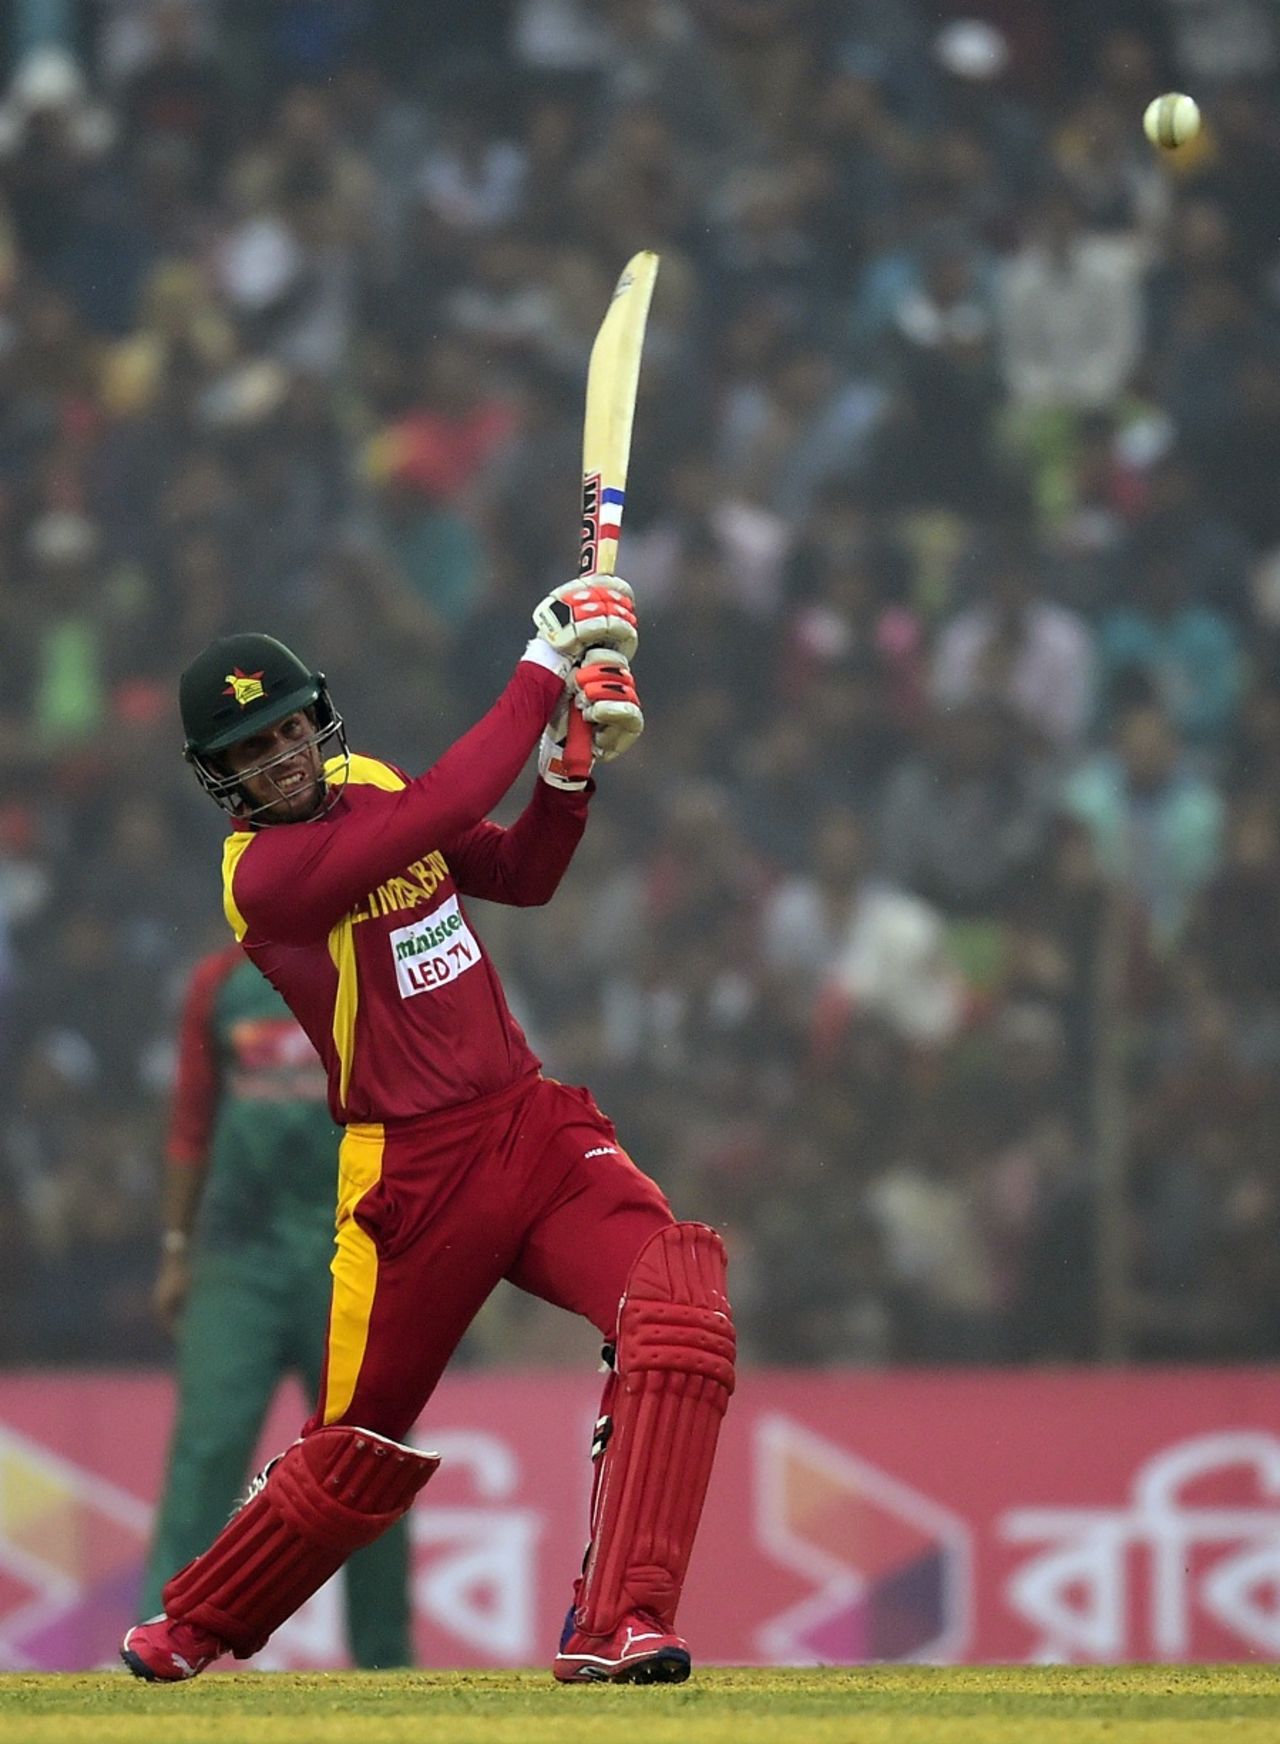 Malcolm Waller belts one through the covers, Bangladesh v Zimbabwe, 3rd T20, Khulna, January 20, 2016